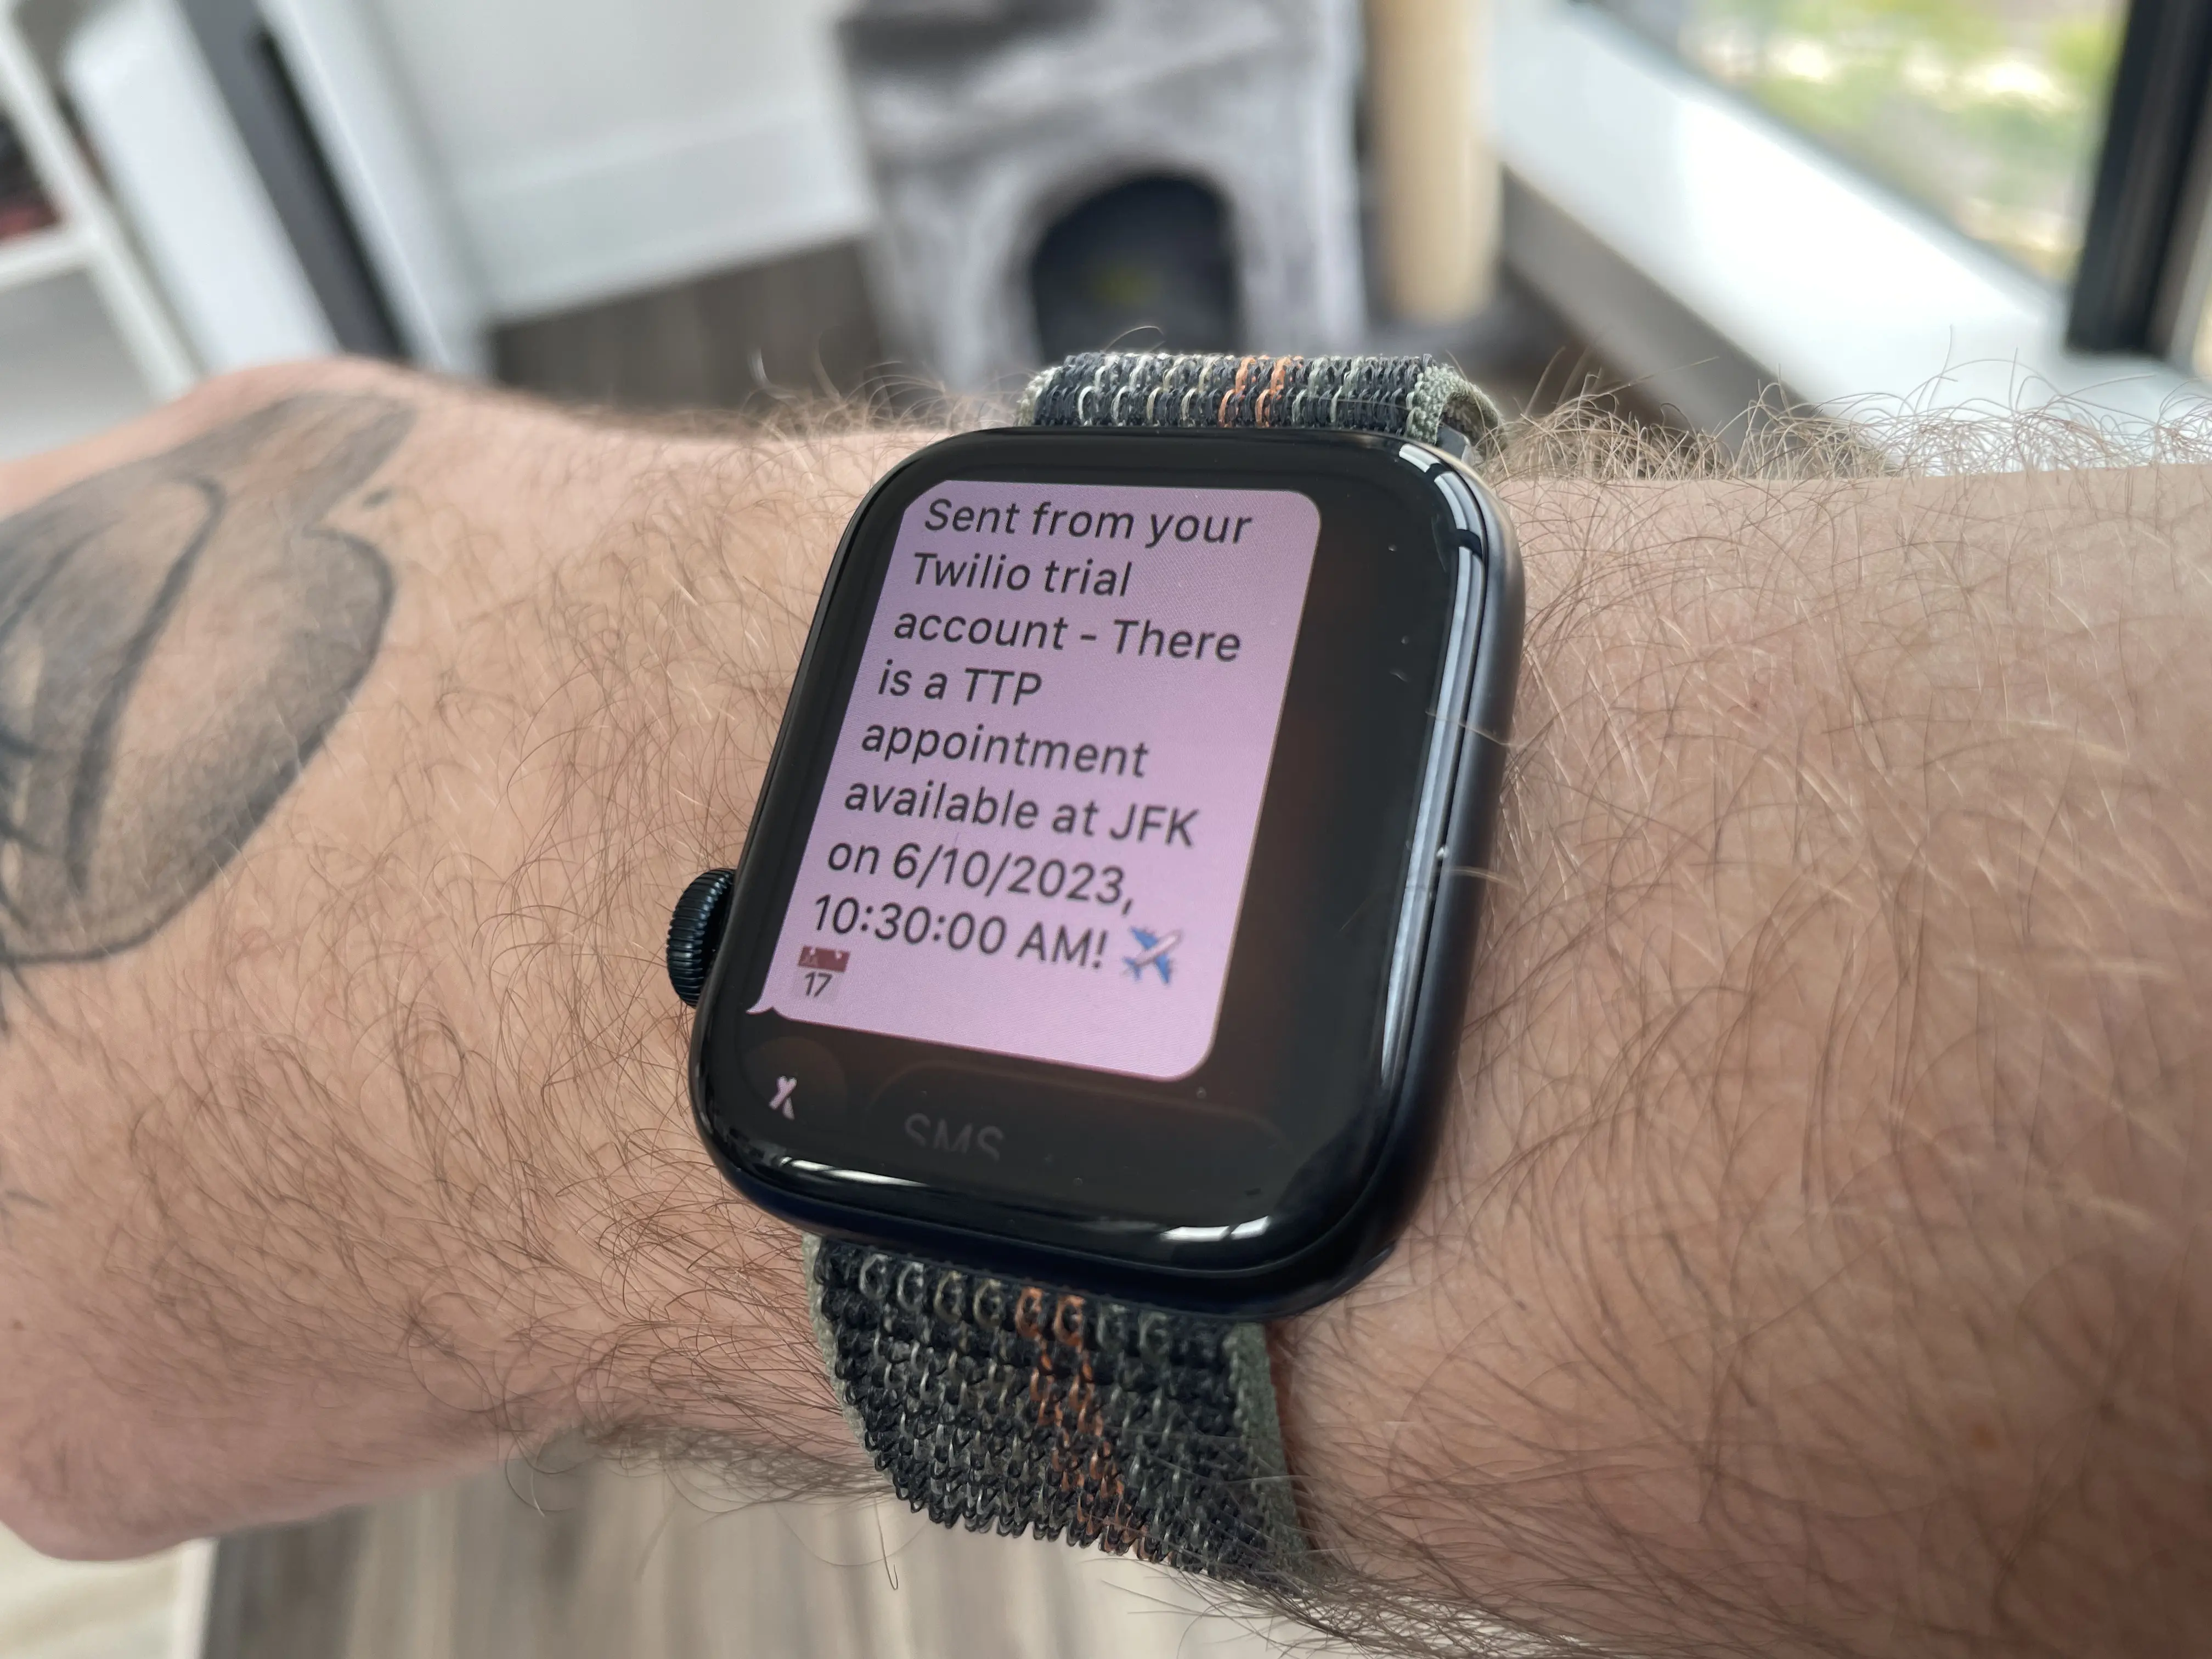 Apple watch showing a text message with the appointment details